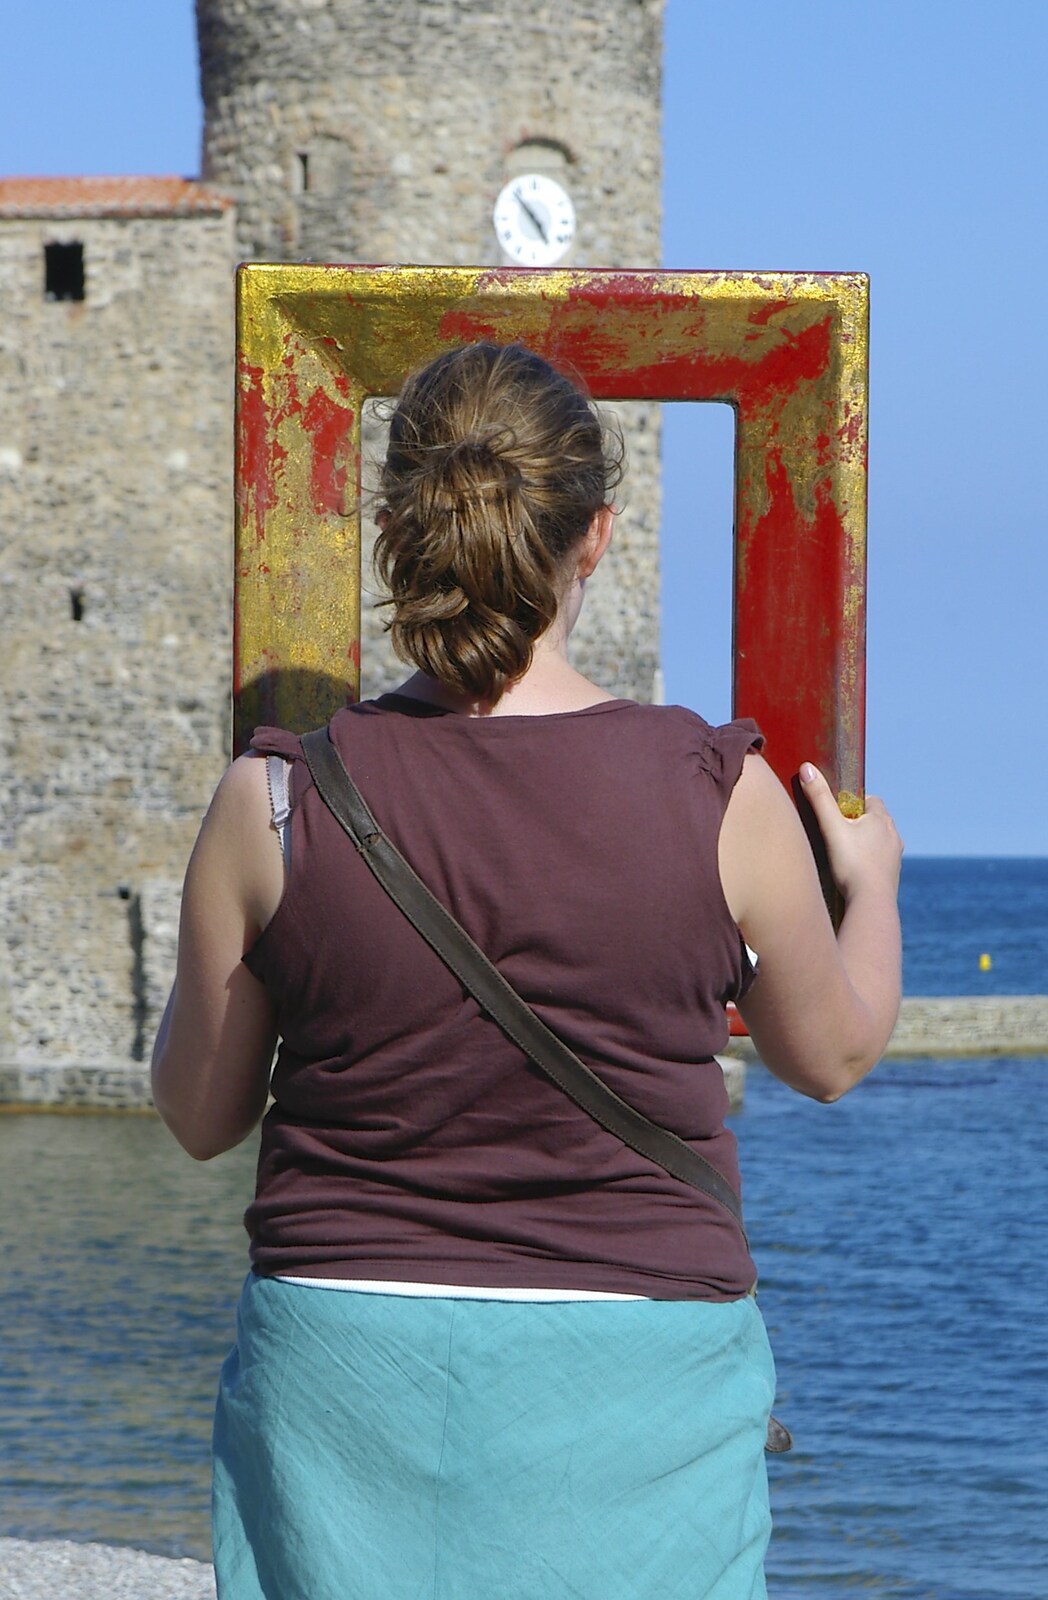 Isobel has a peer through a picture frame from The Colourful Boats of Collioure, France - 20th September 2006